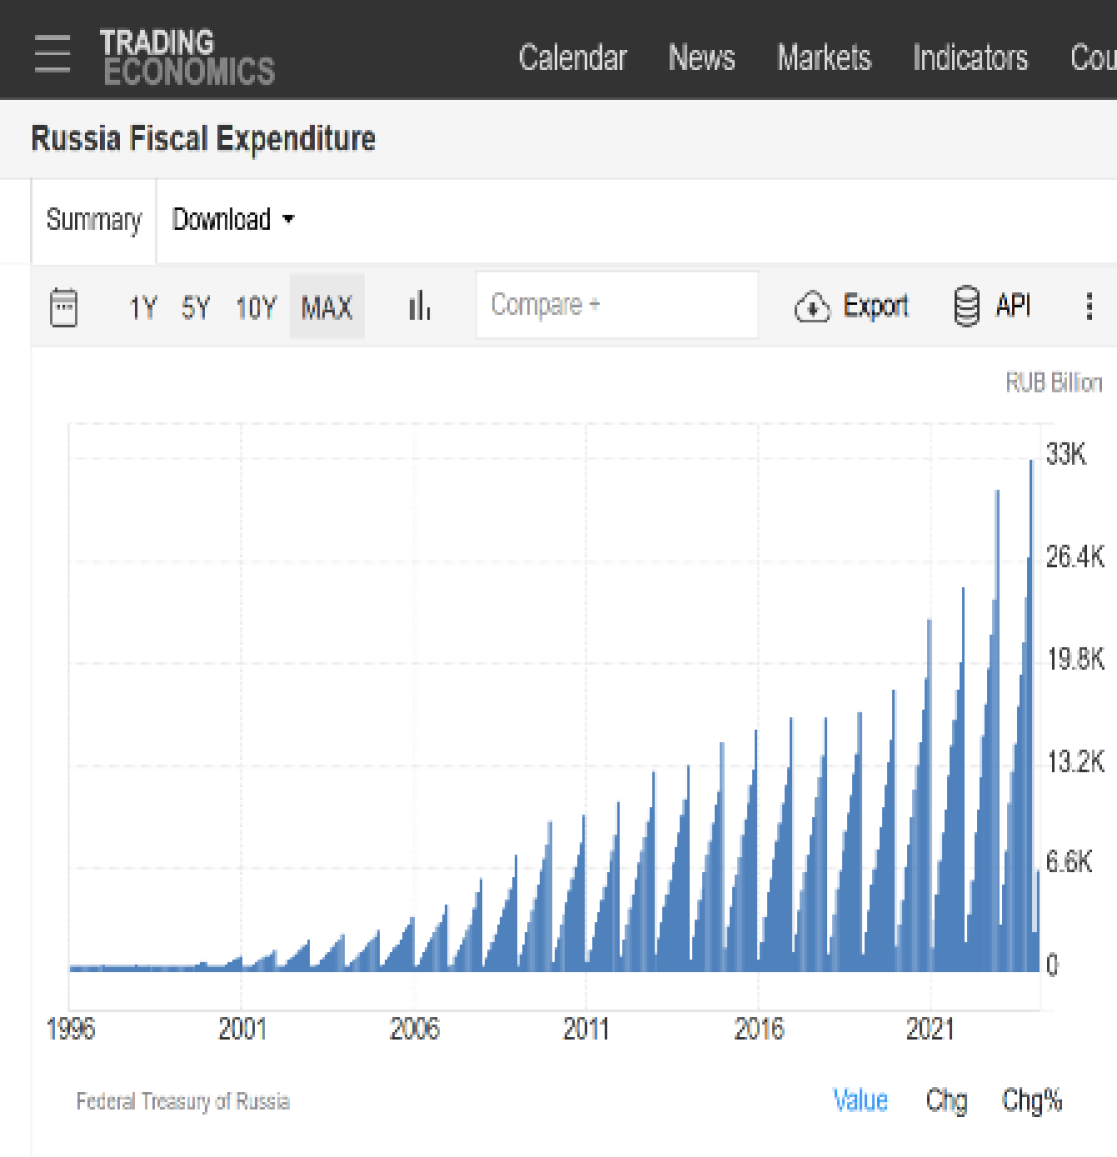 Russia's fiscal expenditure